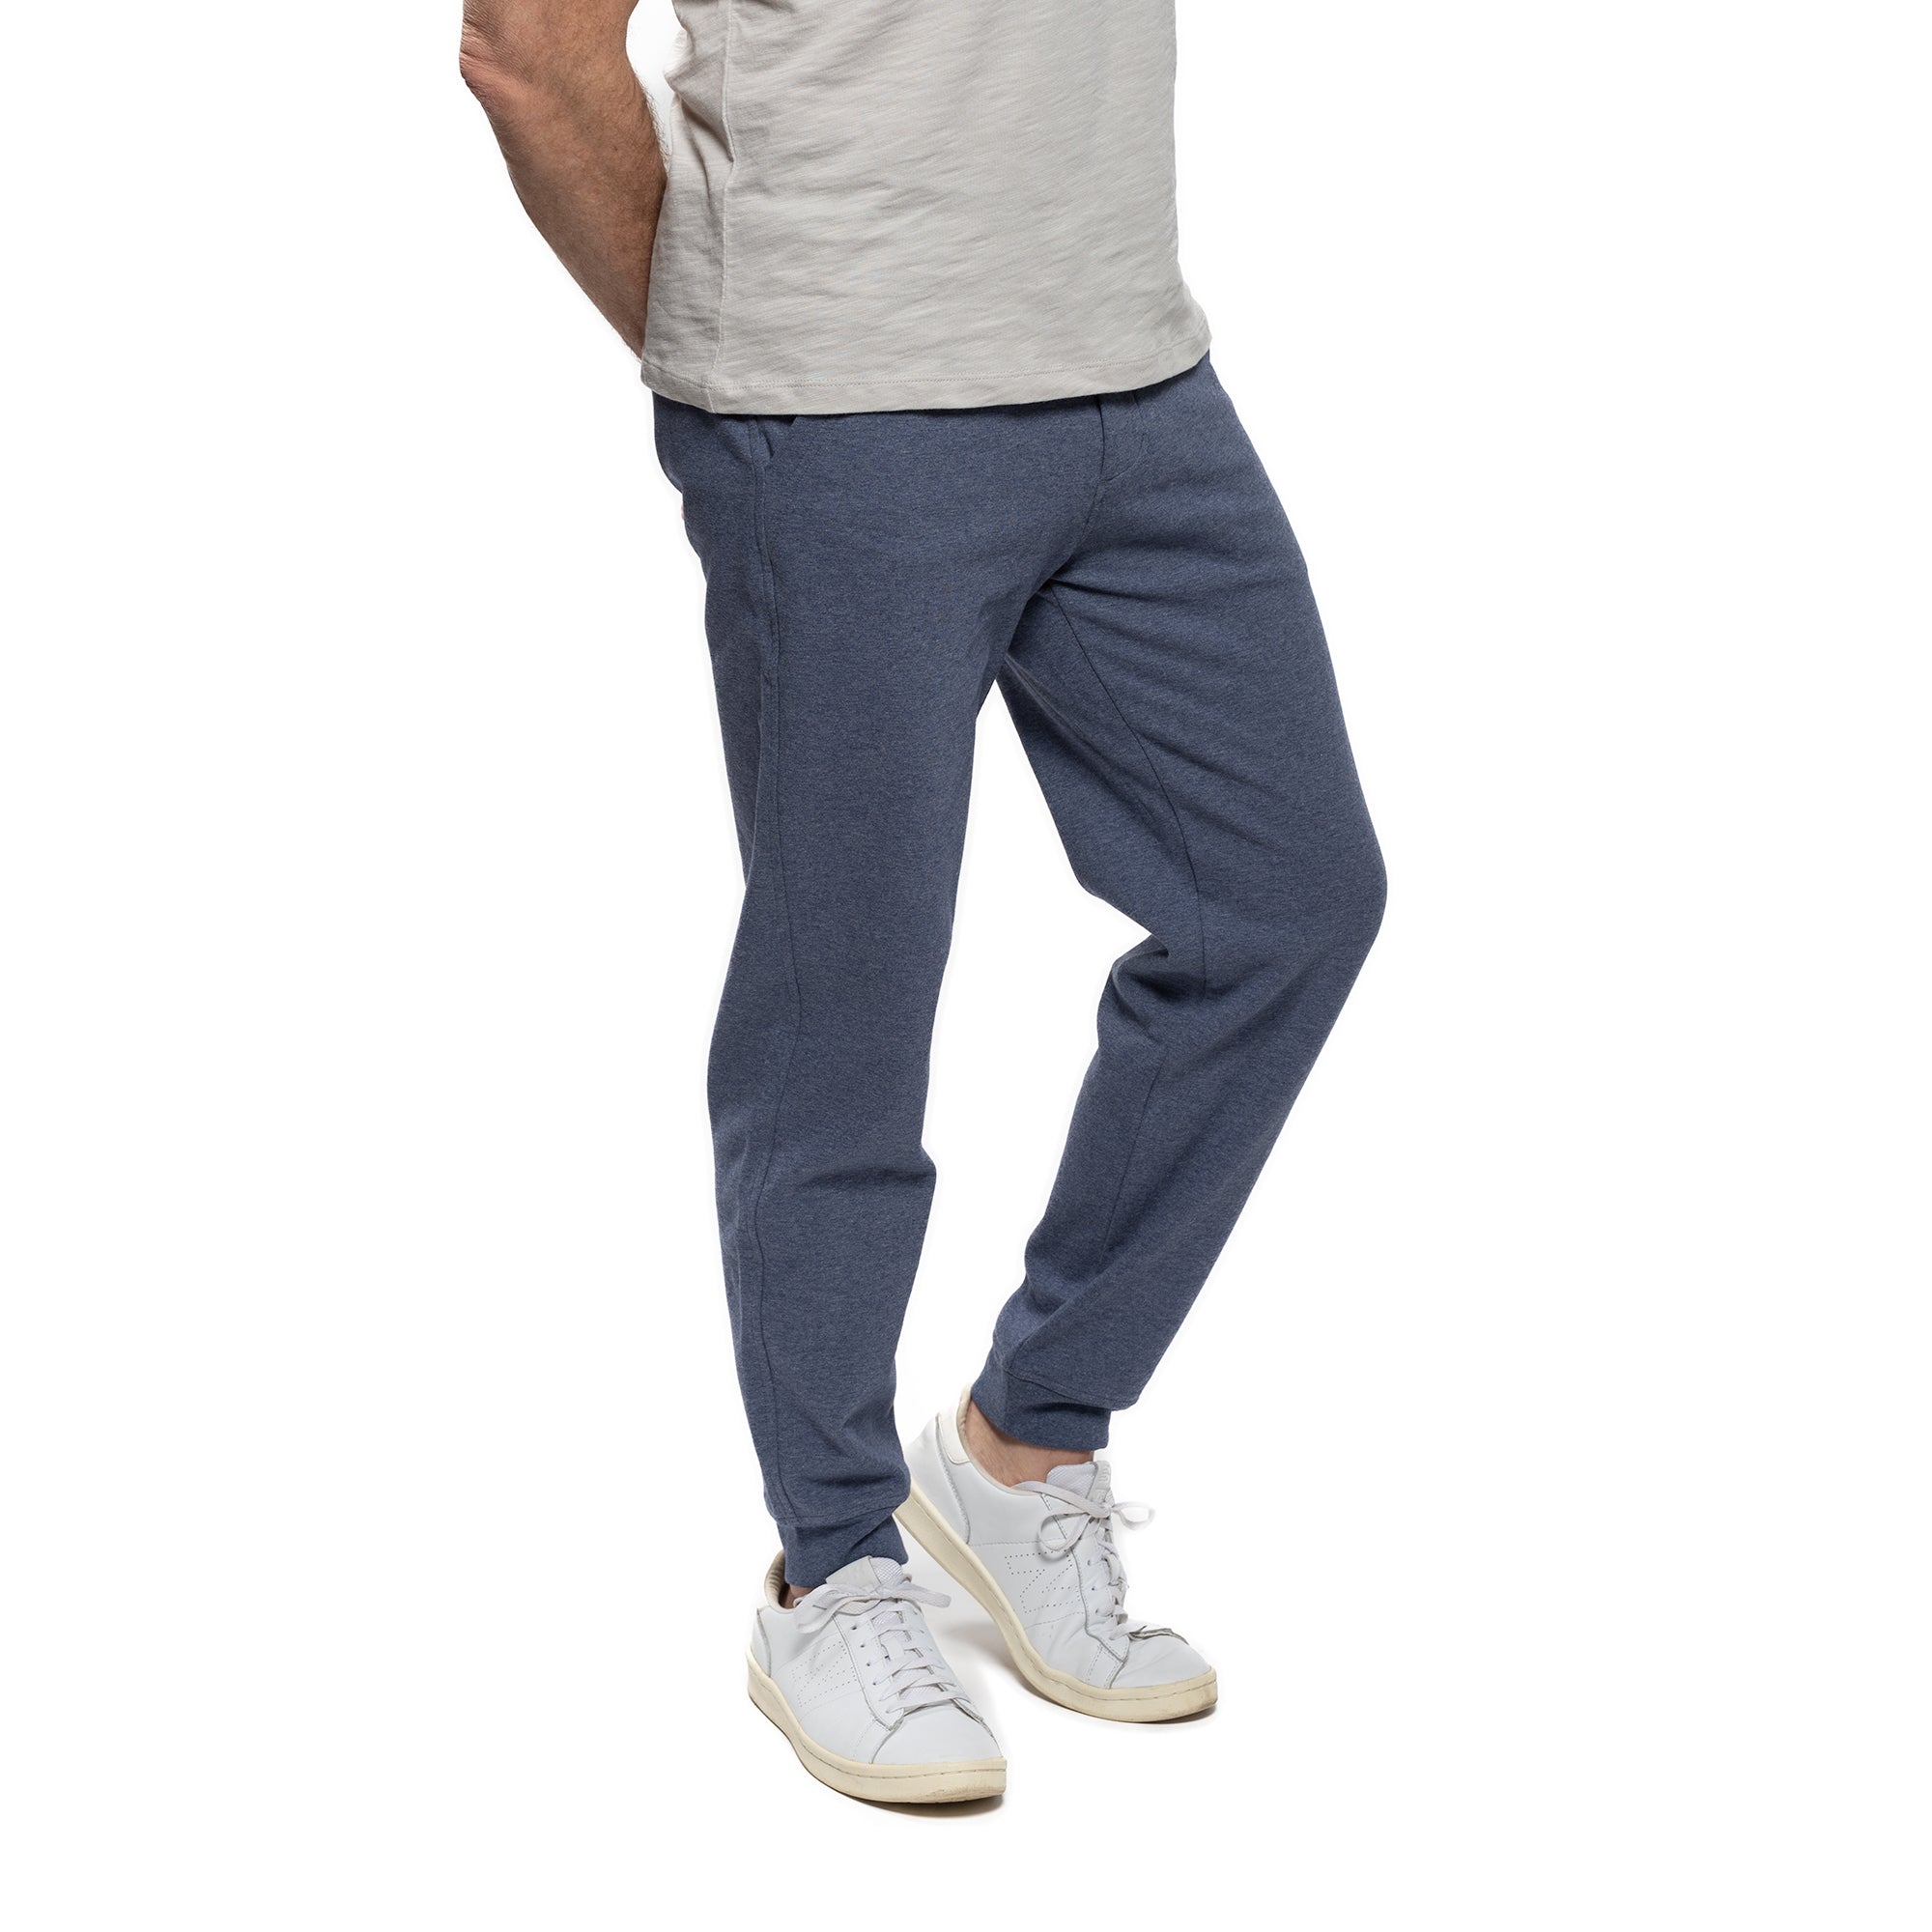 All Day Sweatpants - Heather Navy